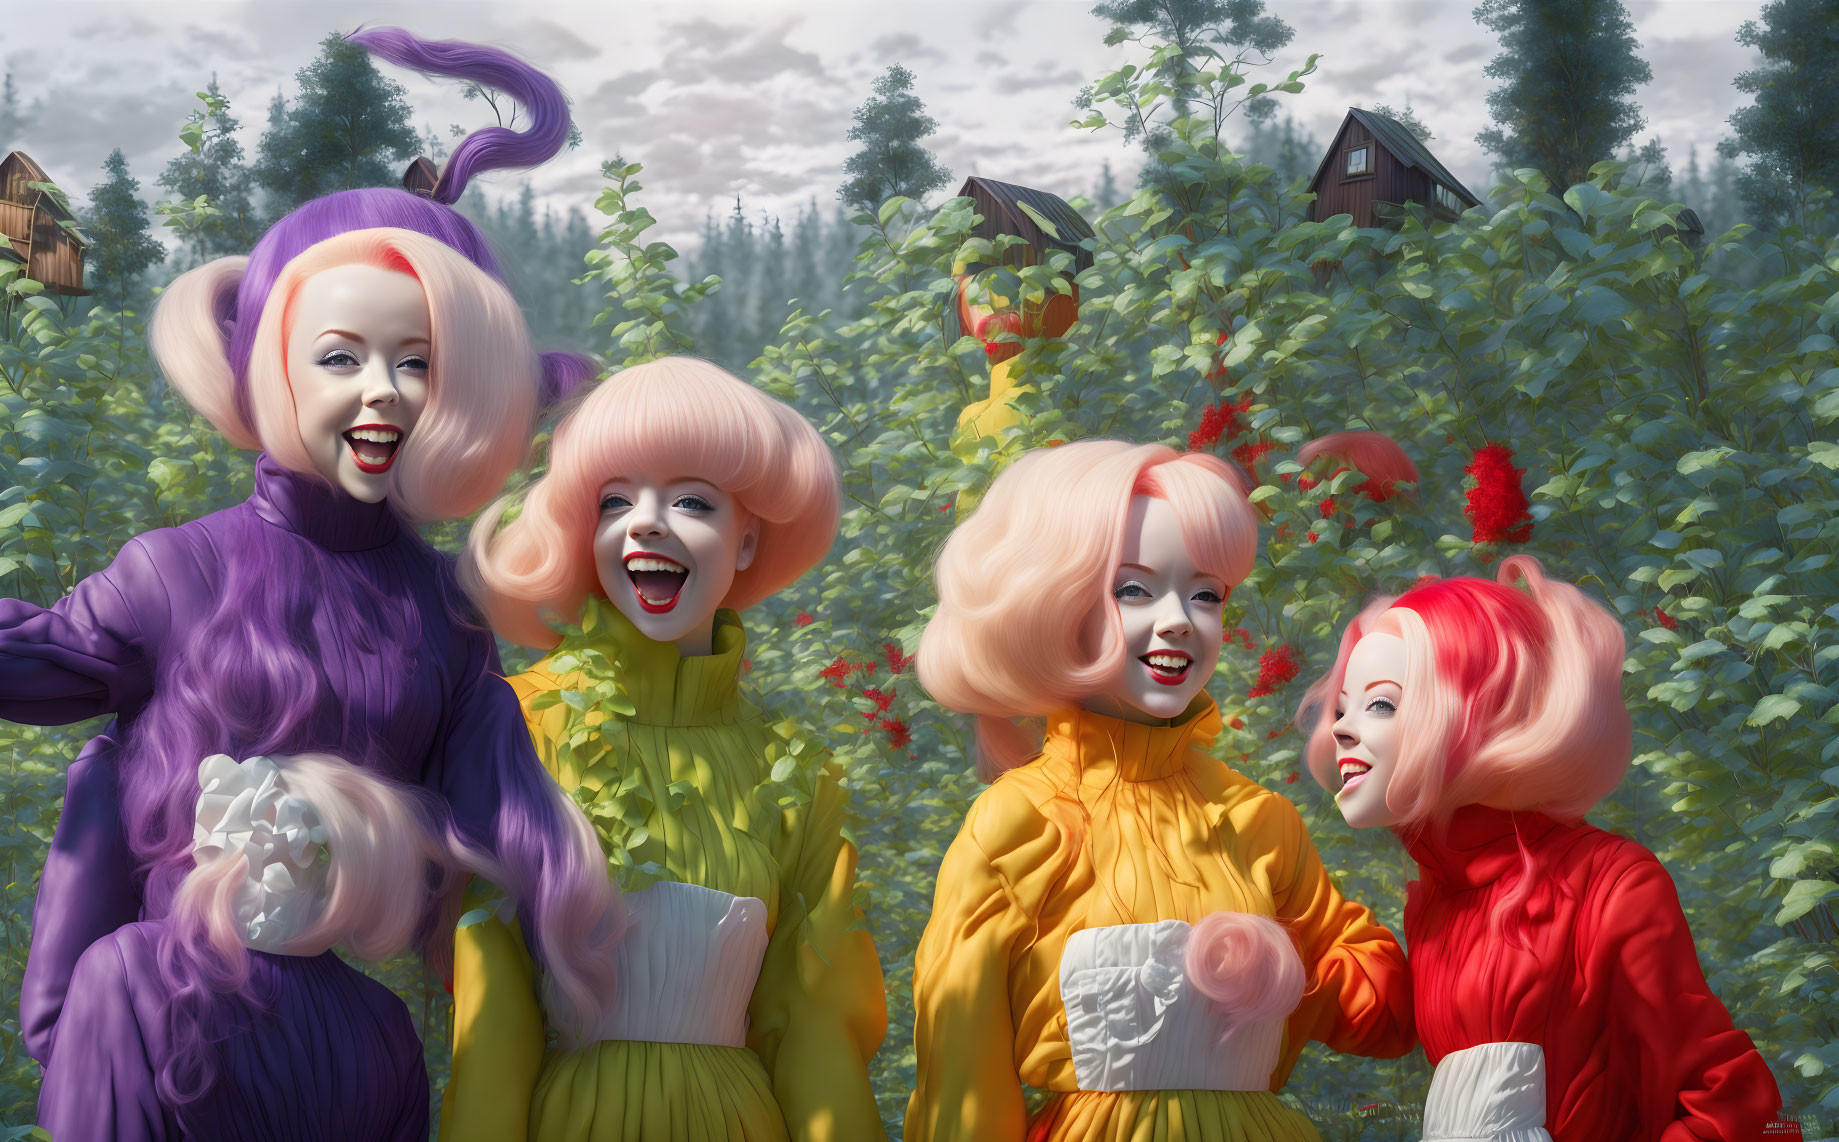 Colorful clowns with vibrant hair in garden setting